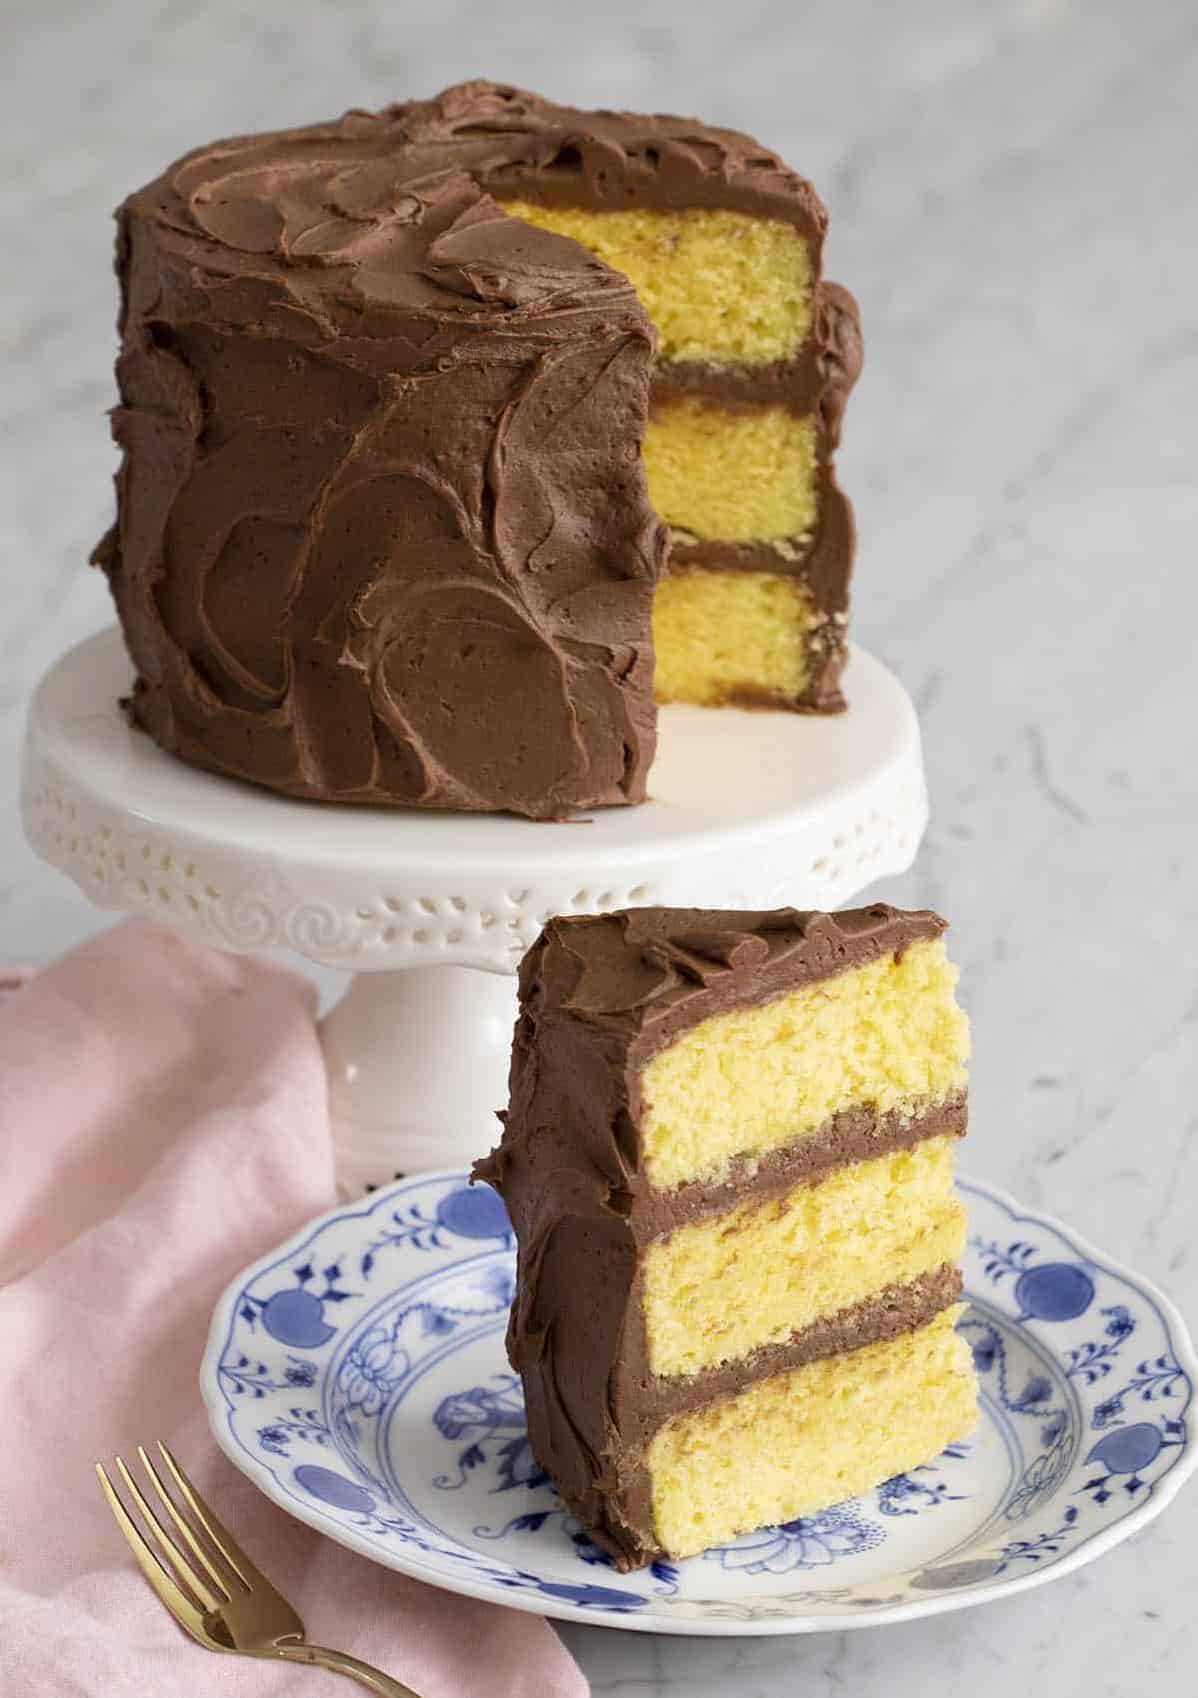  Nothing beats a classic yellow cake.